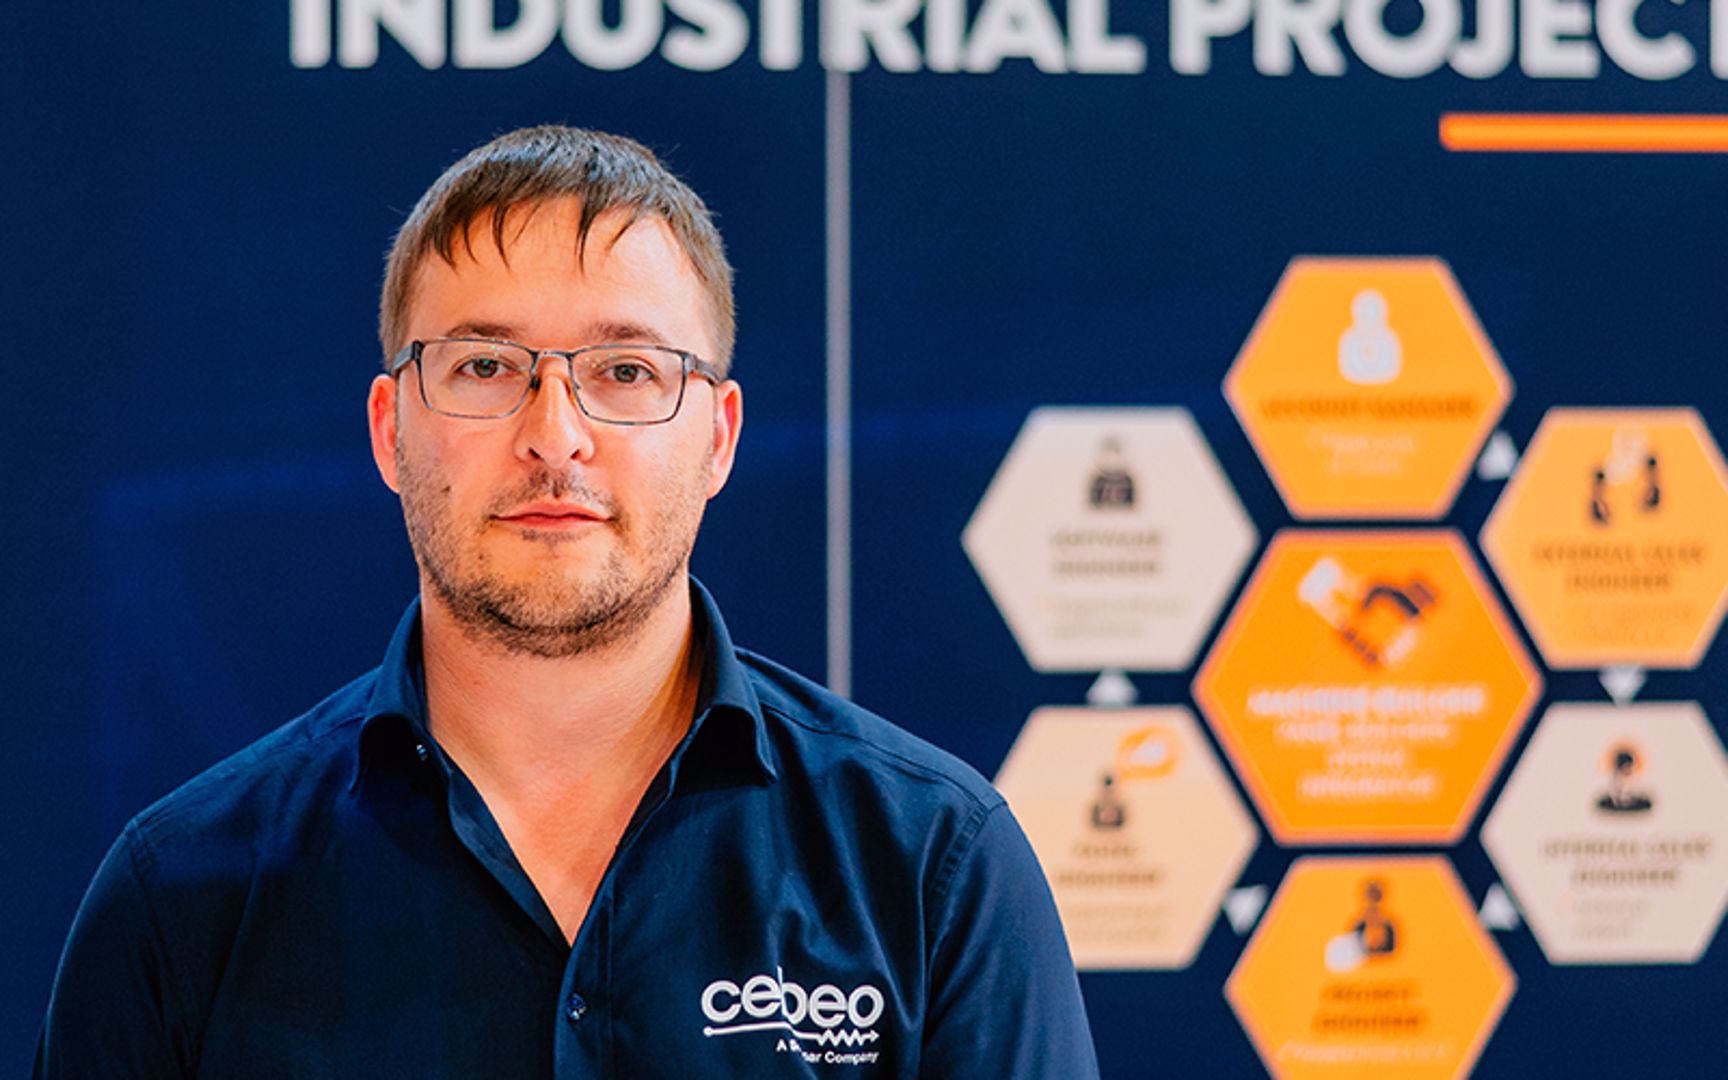 CEBEO SOLUTIONS FOR INDUSTRY